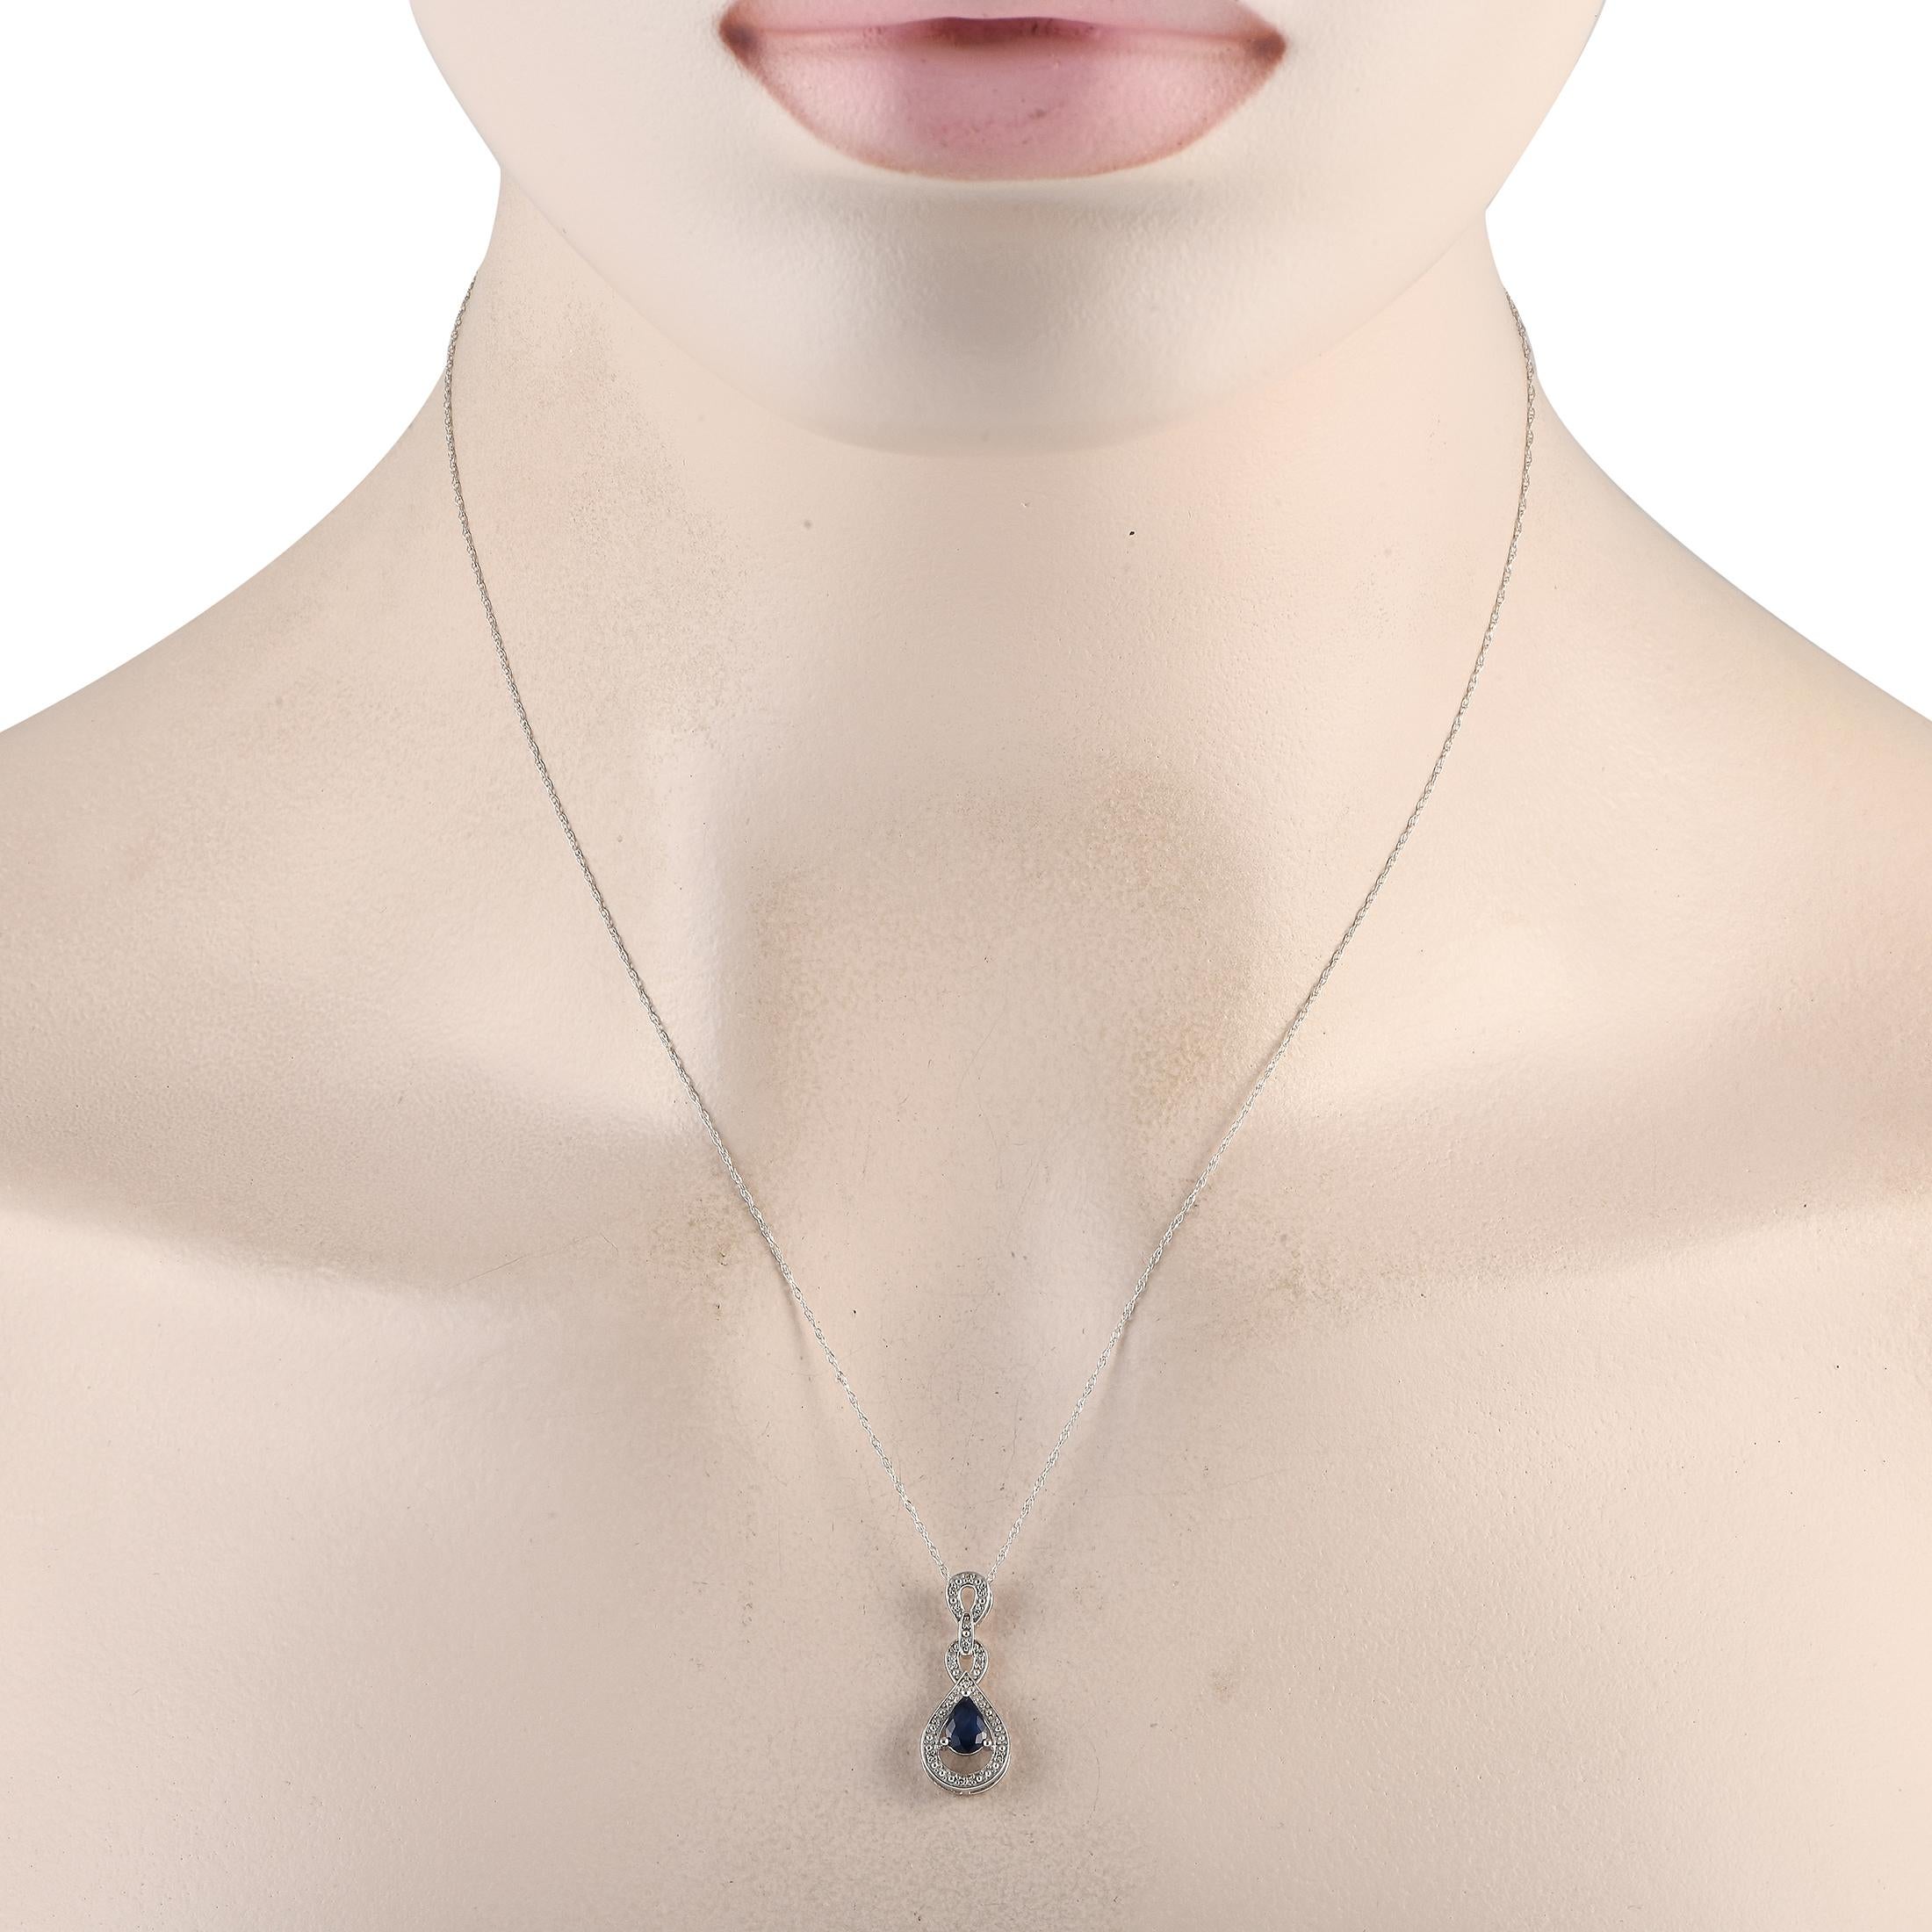 A stunning combination of gemstones makes this luxury necklace incredibly captivating. On the intricate 14K white gold pendant, youll find a stunning oval-cut sapphire gemstone paired with inset diamond accents totaling 0.08 carats. It measures 0.85